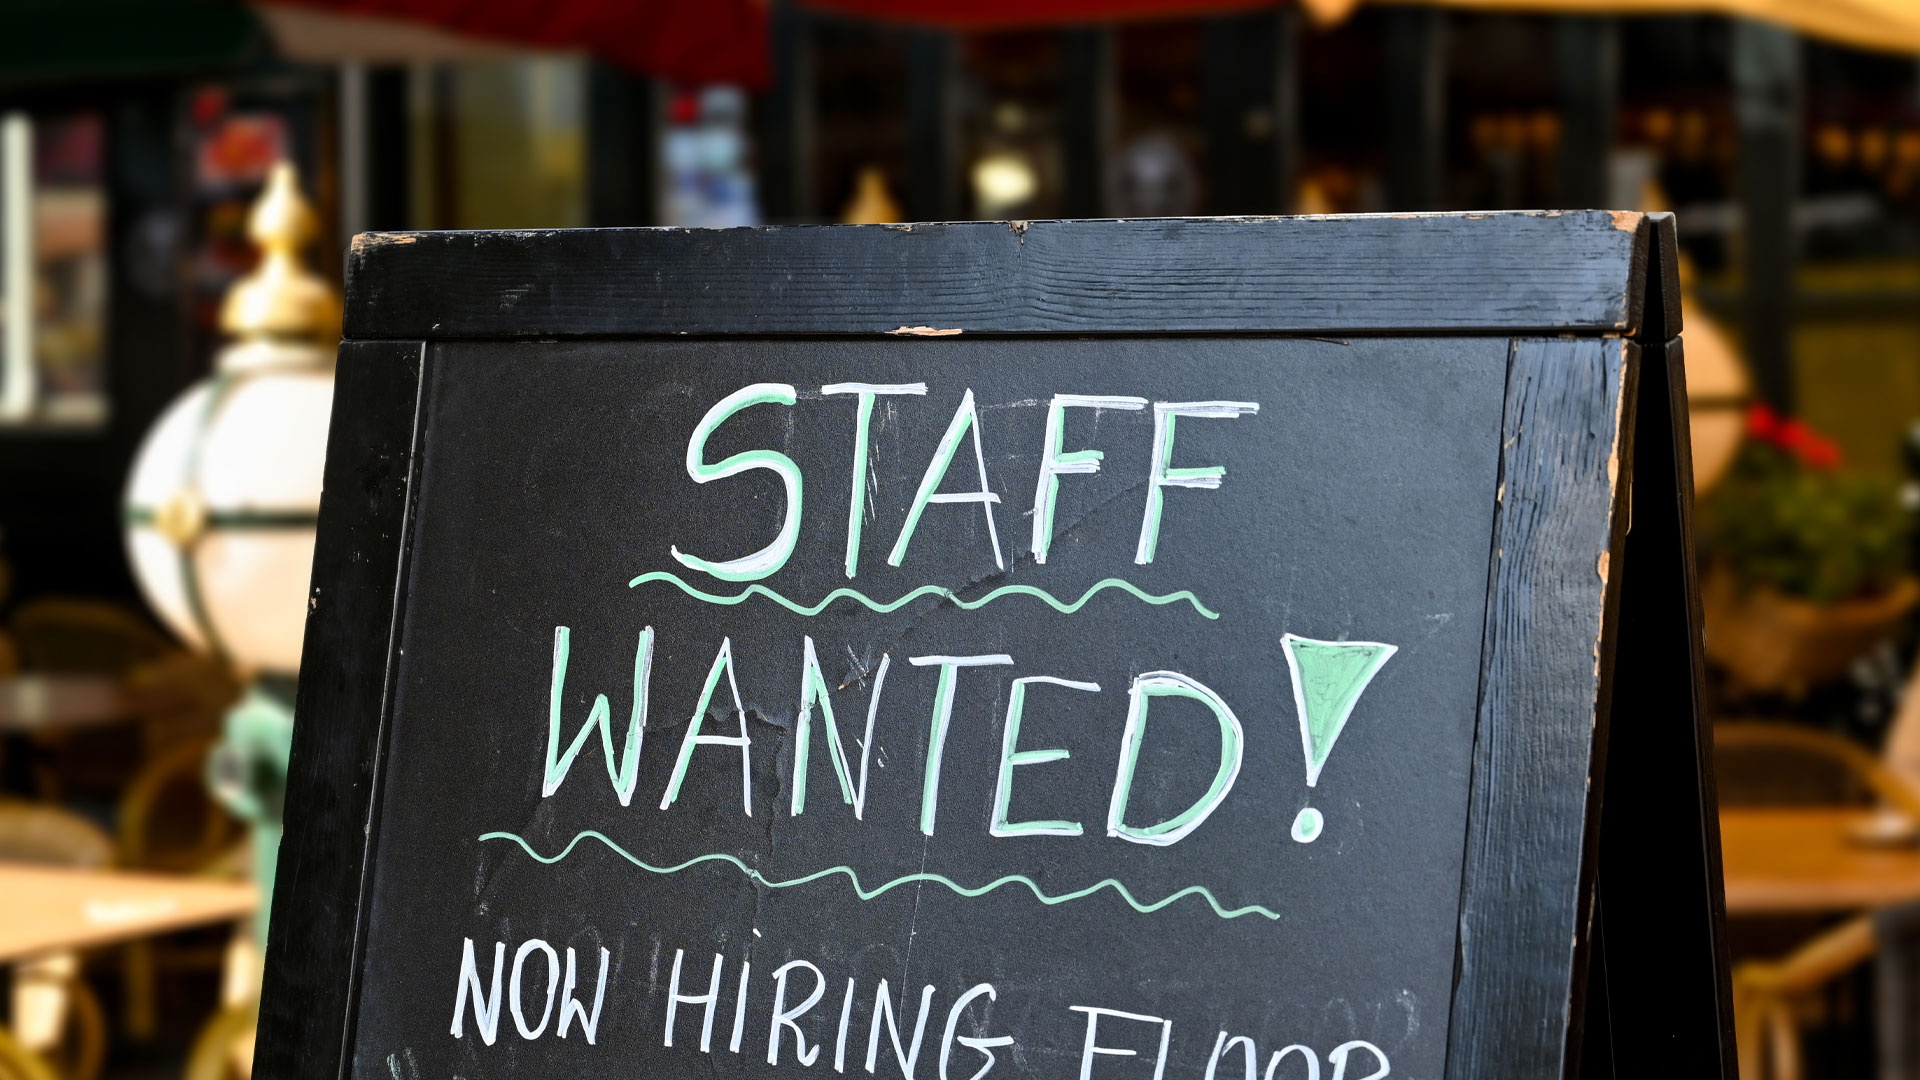 Blackboard outside a restaurant with the words "Staff Wanted!" written on it.